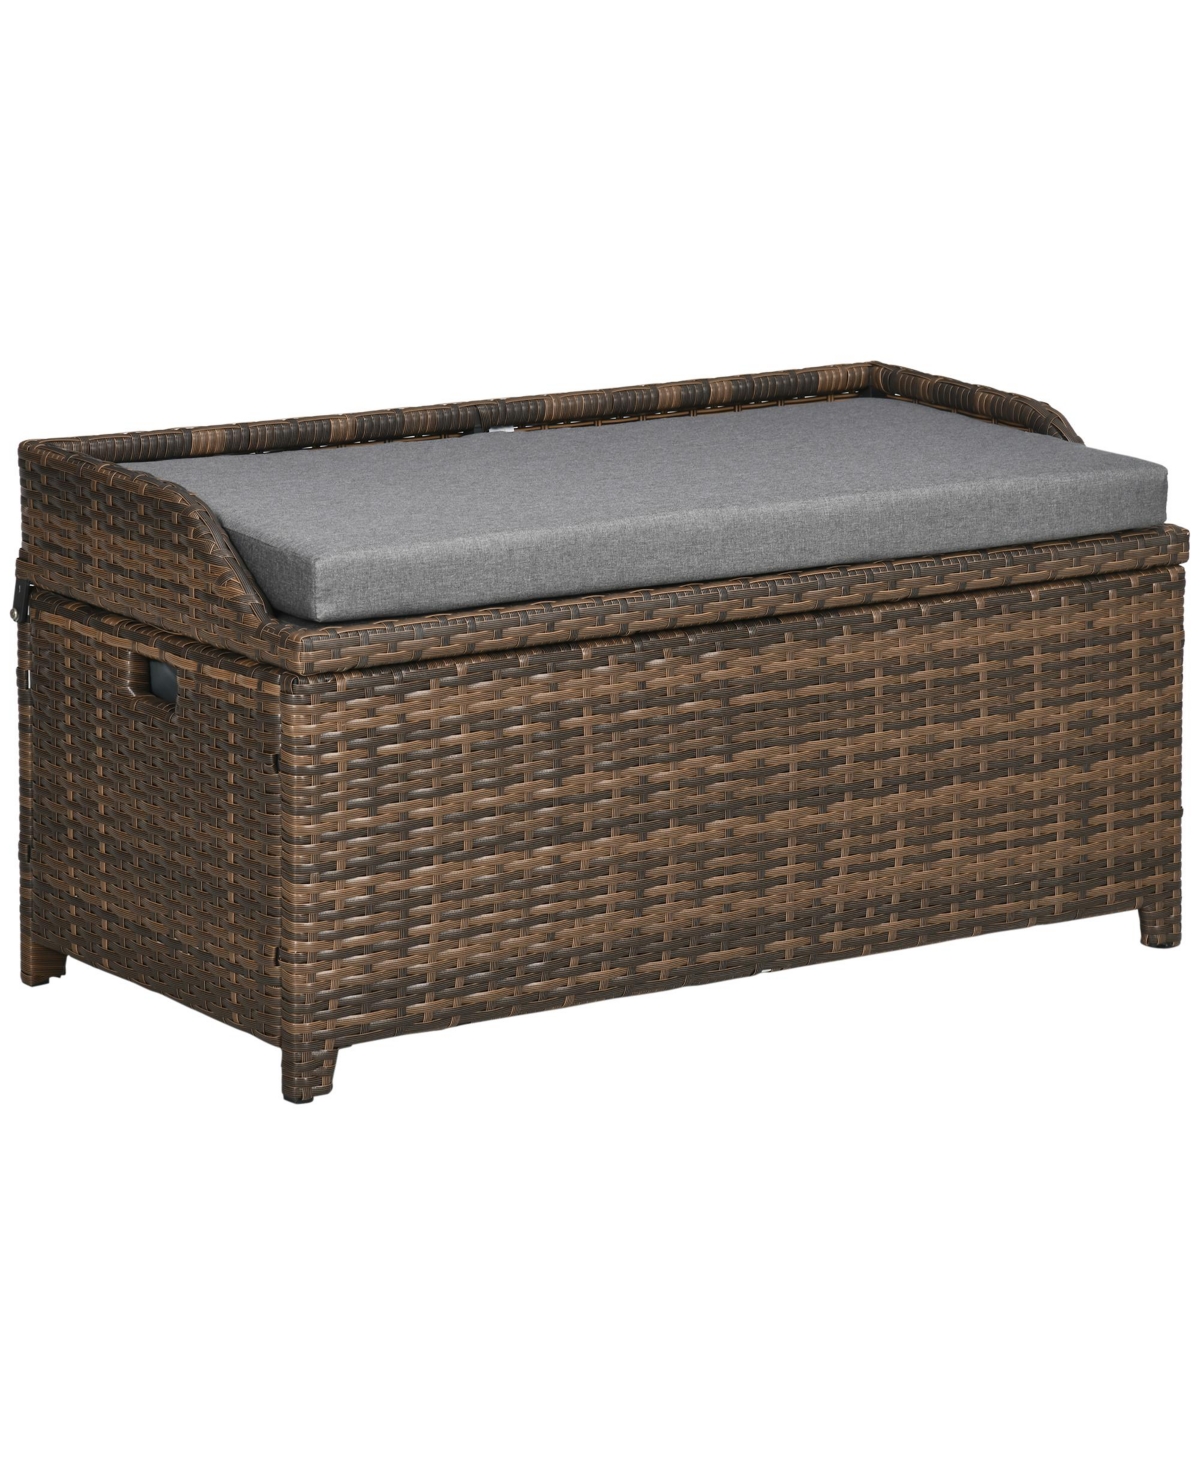 Patio Wicker Storage Bench, Cushioned Outdoor Pe Rattan Patio Furniture, Air Strut Assisted Easy Open, Two-In-One Seat Box with Handles Seat,